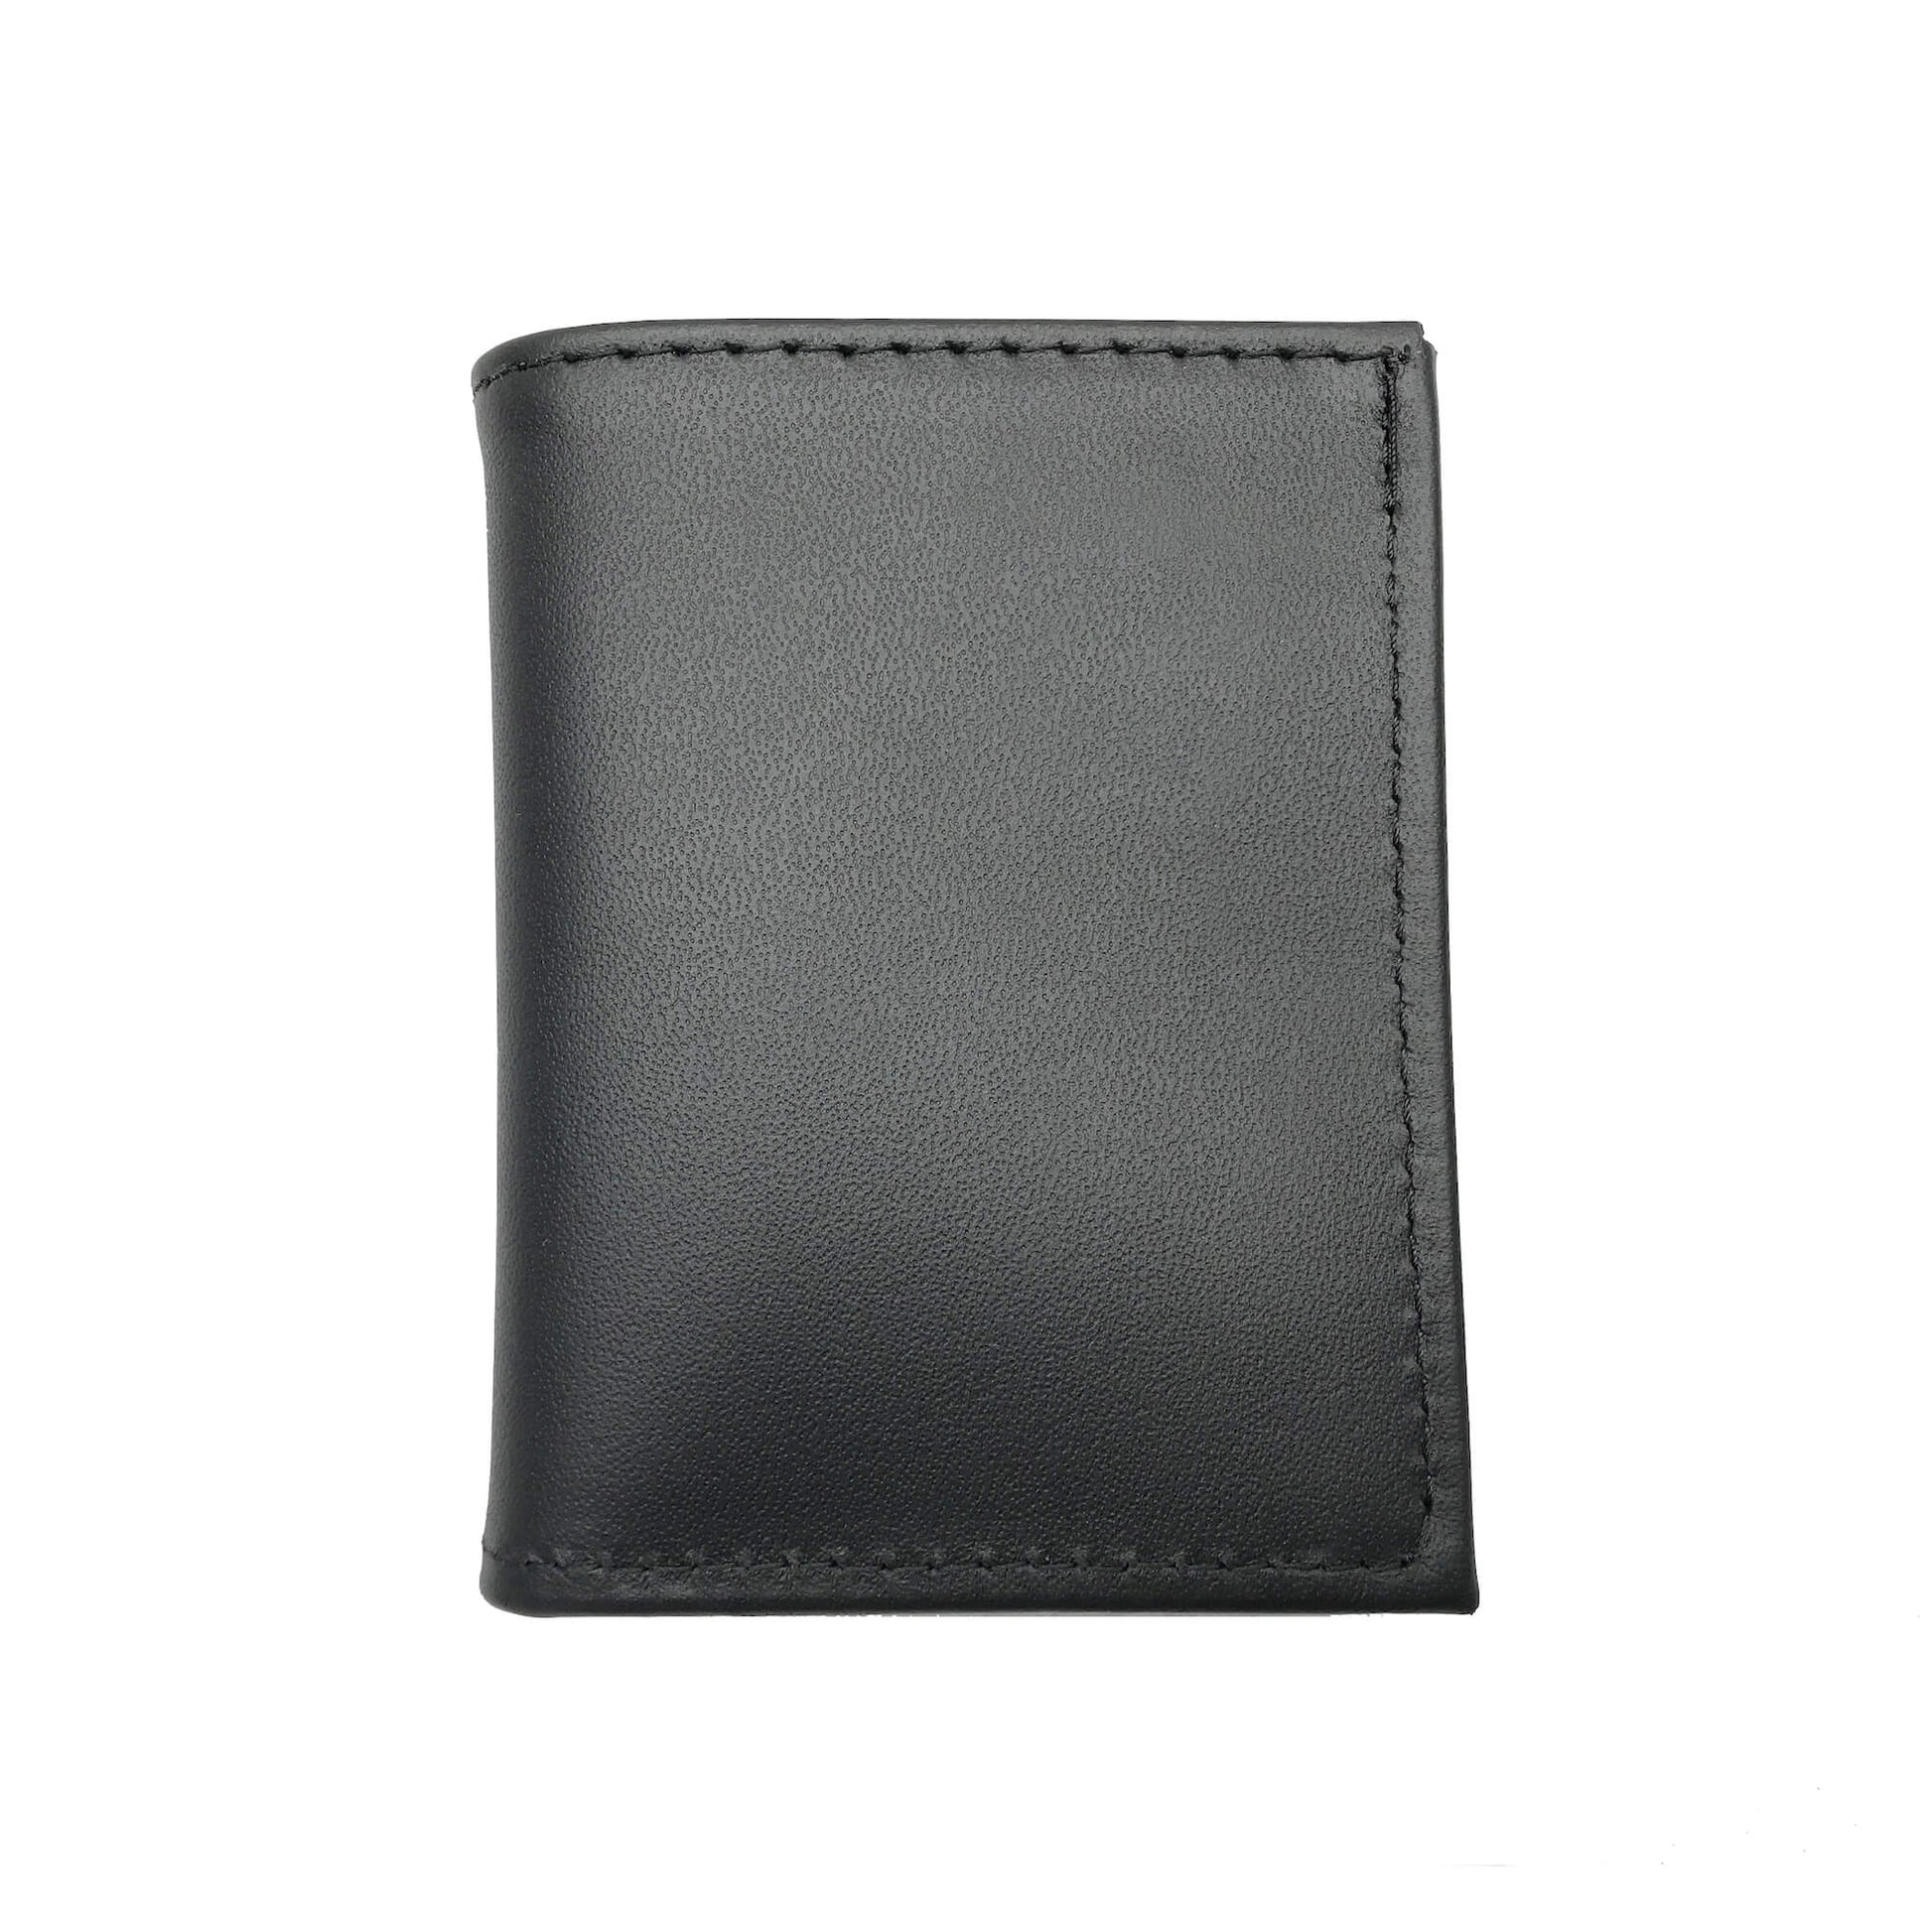 U.S. Army Military Police (CID) Bifold Hidden Badge Wallet-Perfect Fit-911 Duty Gear USA